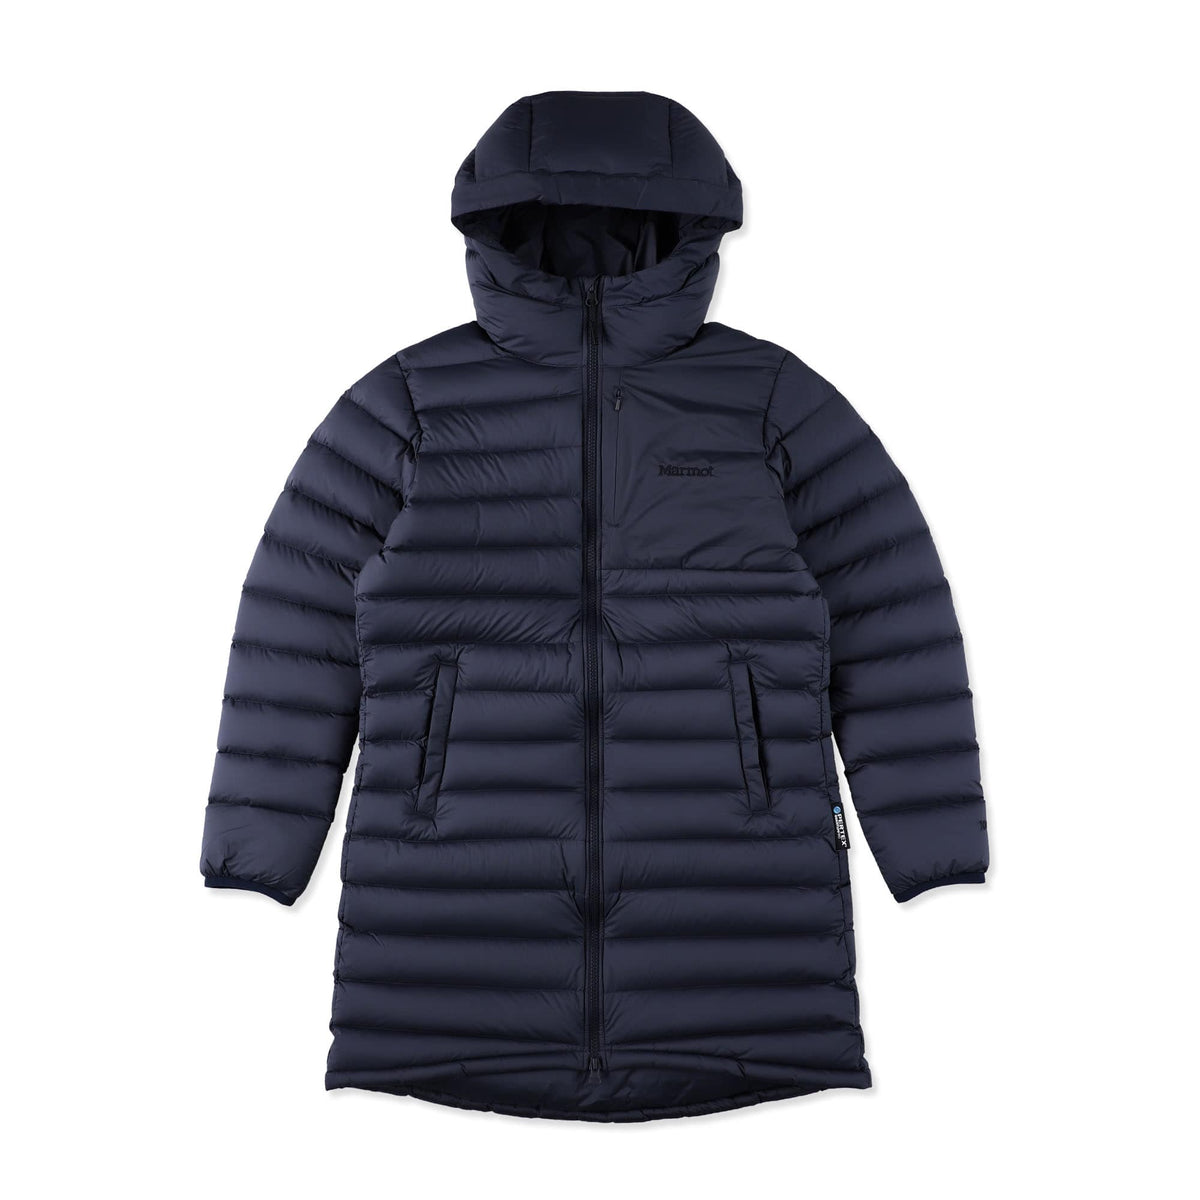 W's 1,000FP Muse Long Down Jacket(ウィメンズ1,000フィルパワー